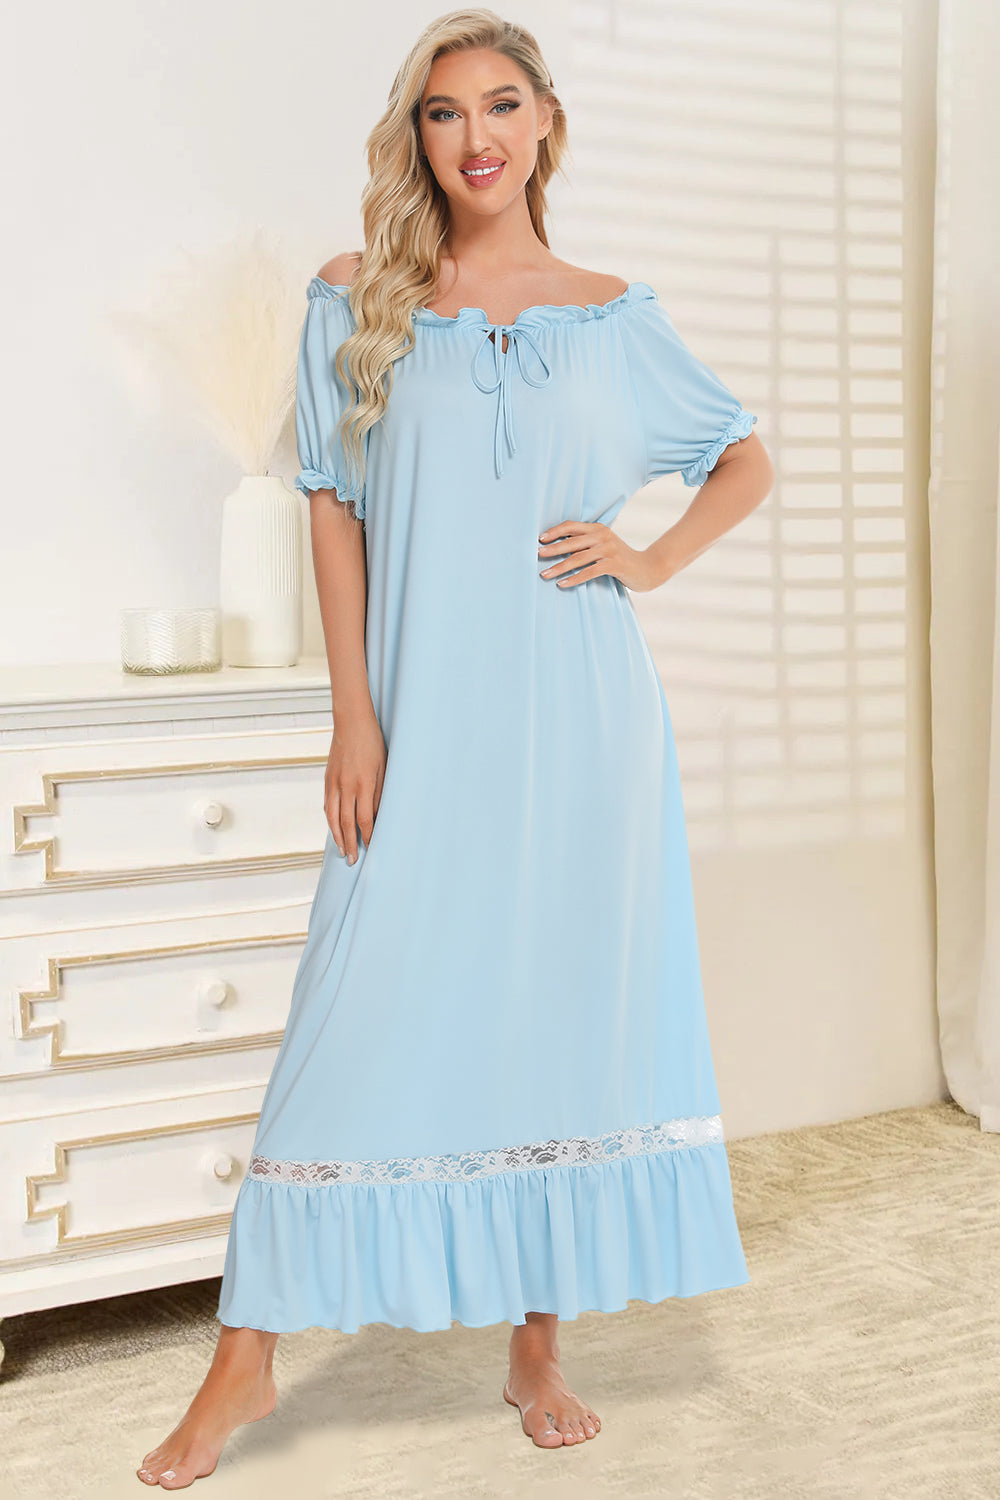 Pastel Lace & Short Sleeve Nightgown See Colors!